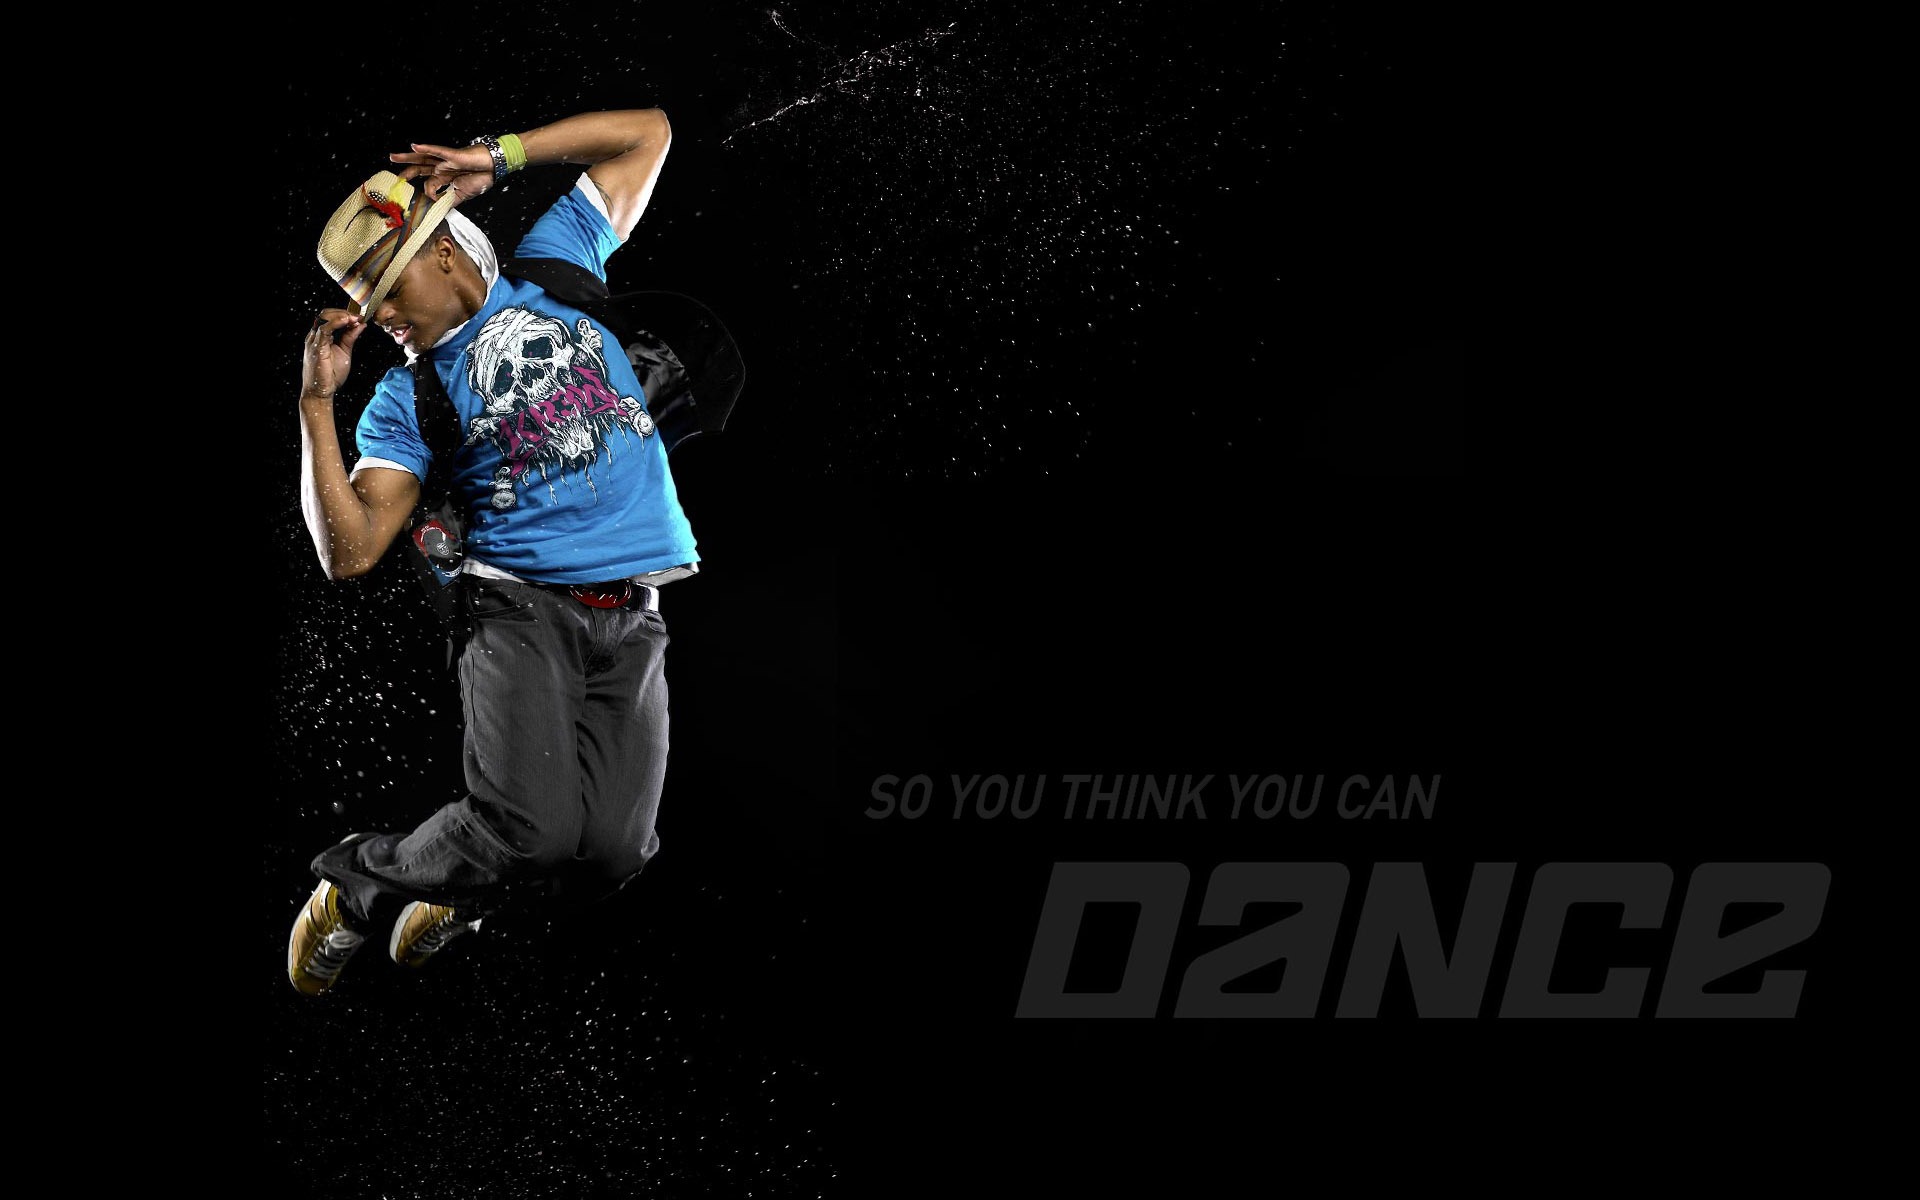 So You Think You Can Dance 舞林争霸 壁纸(一)20 - 1920x1200